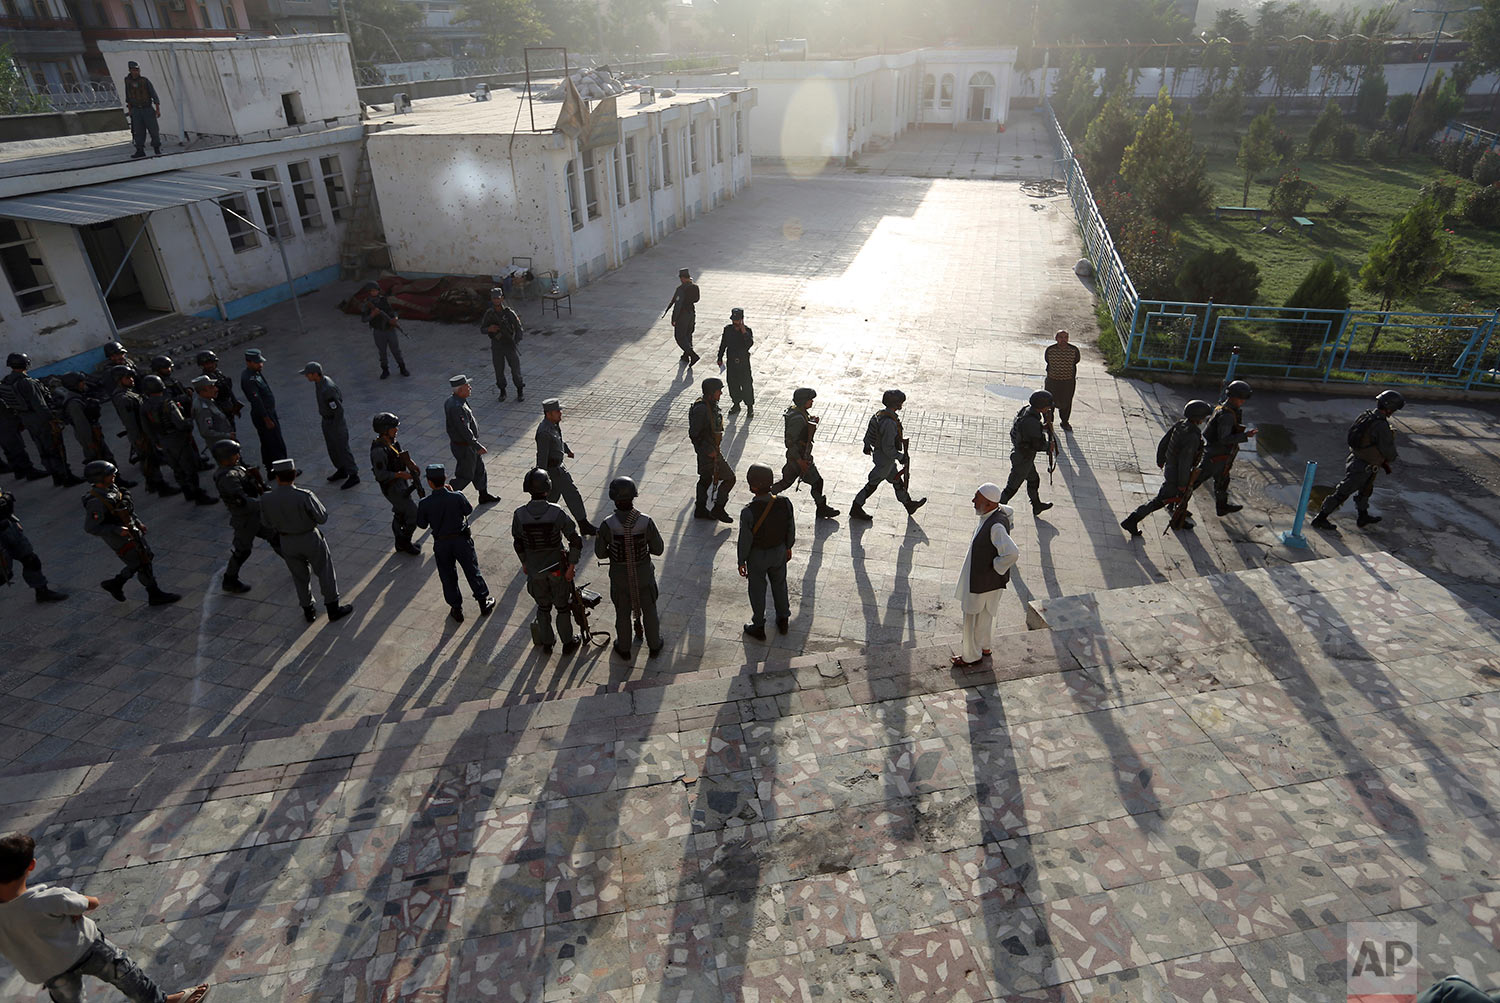  Afghan security police arrive at a Shiite mosque where gunmen attacked during Friday prayers, in Kabul, Afghanistan, Saturday, Aug. 26, 2017. Militants stormed the packed Shiite mosque during Friday prayers in an attack killing worshippers, an offic